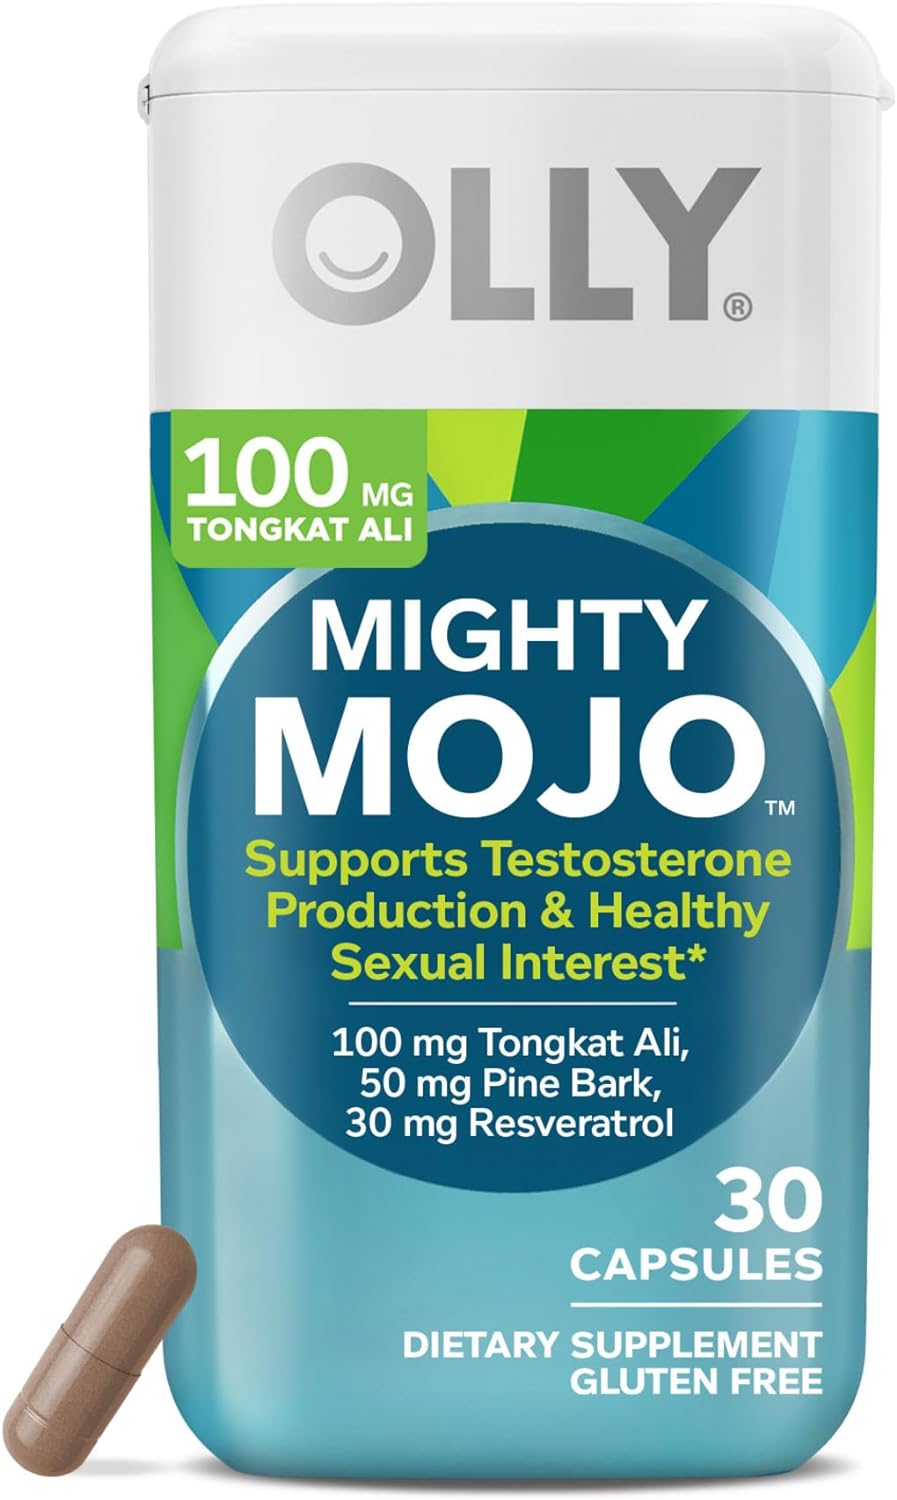 OLLY Mighty Mojo, Tongkat Ali, Resveratrol & Pine Bark, Testosterone with Antioxidant Support, Supplement for Men, 30 Count